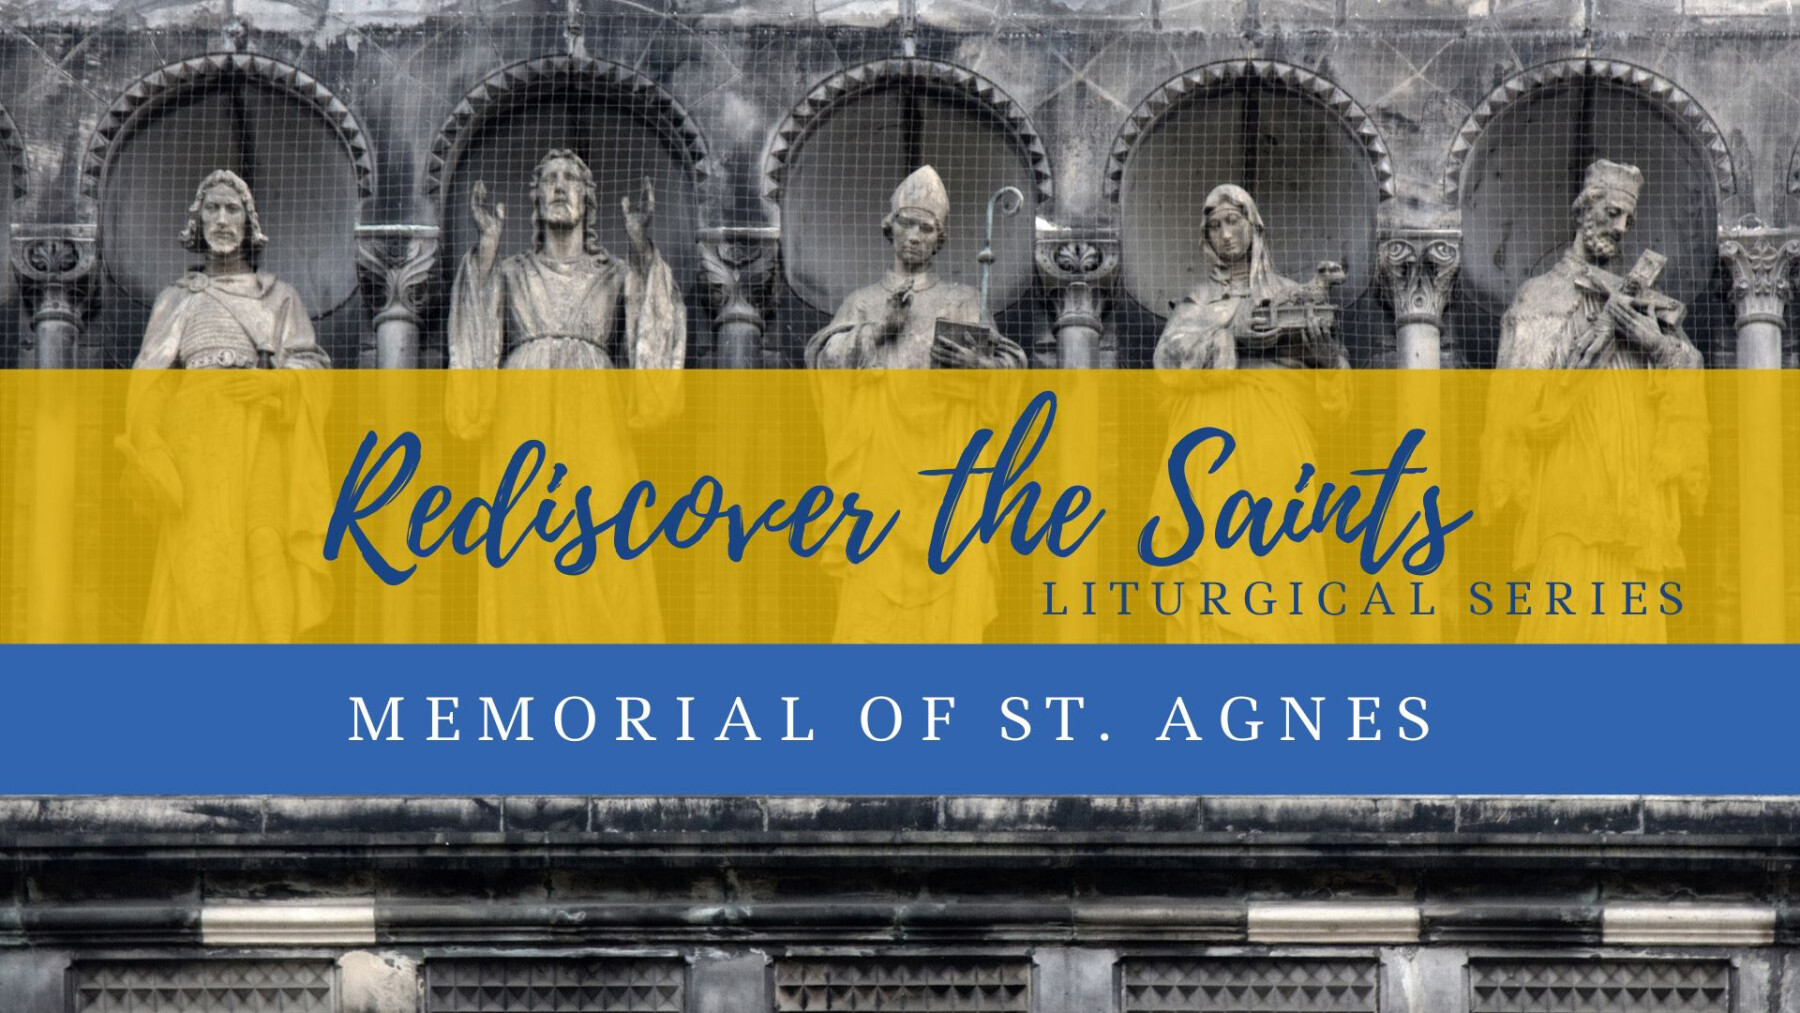 Rediscover the Saints Liturgical Series: Memorial of St. Agnes